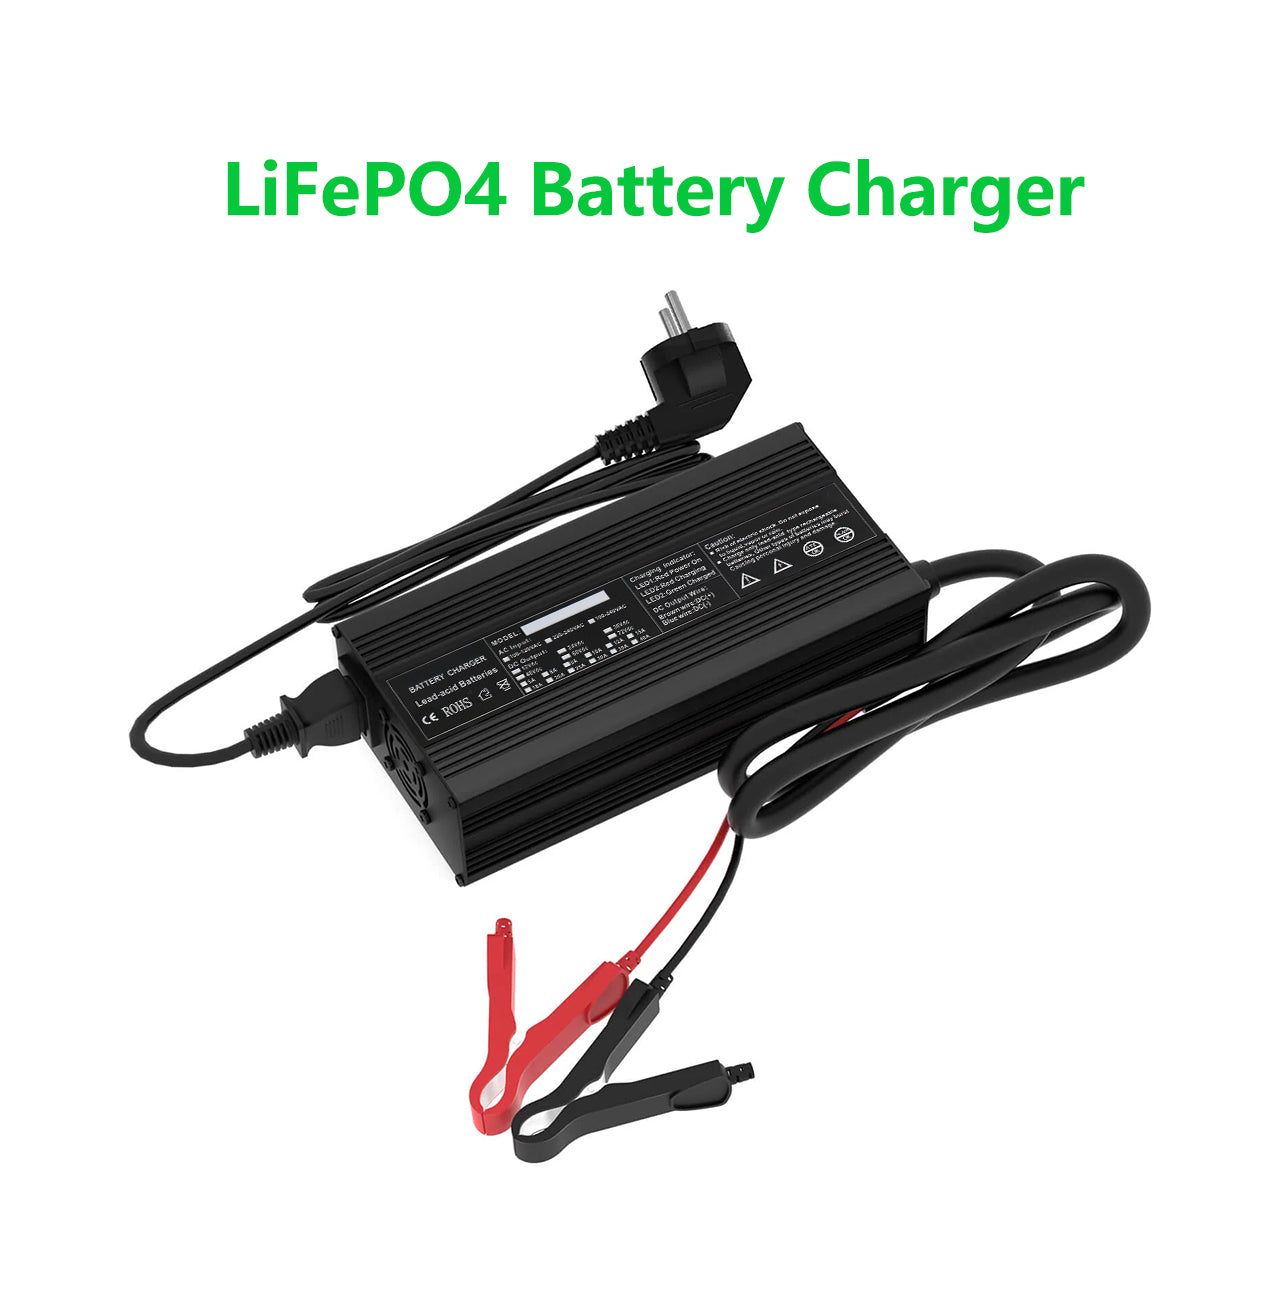 40A Lithium Battery Charger